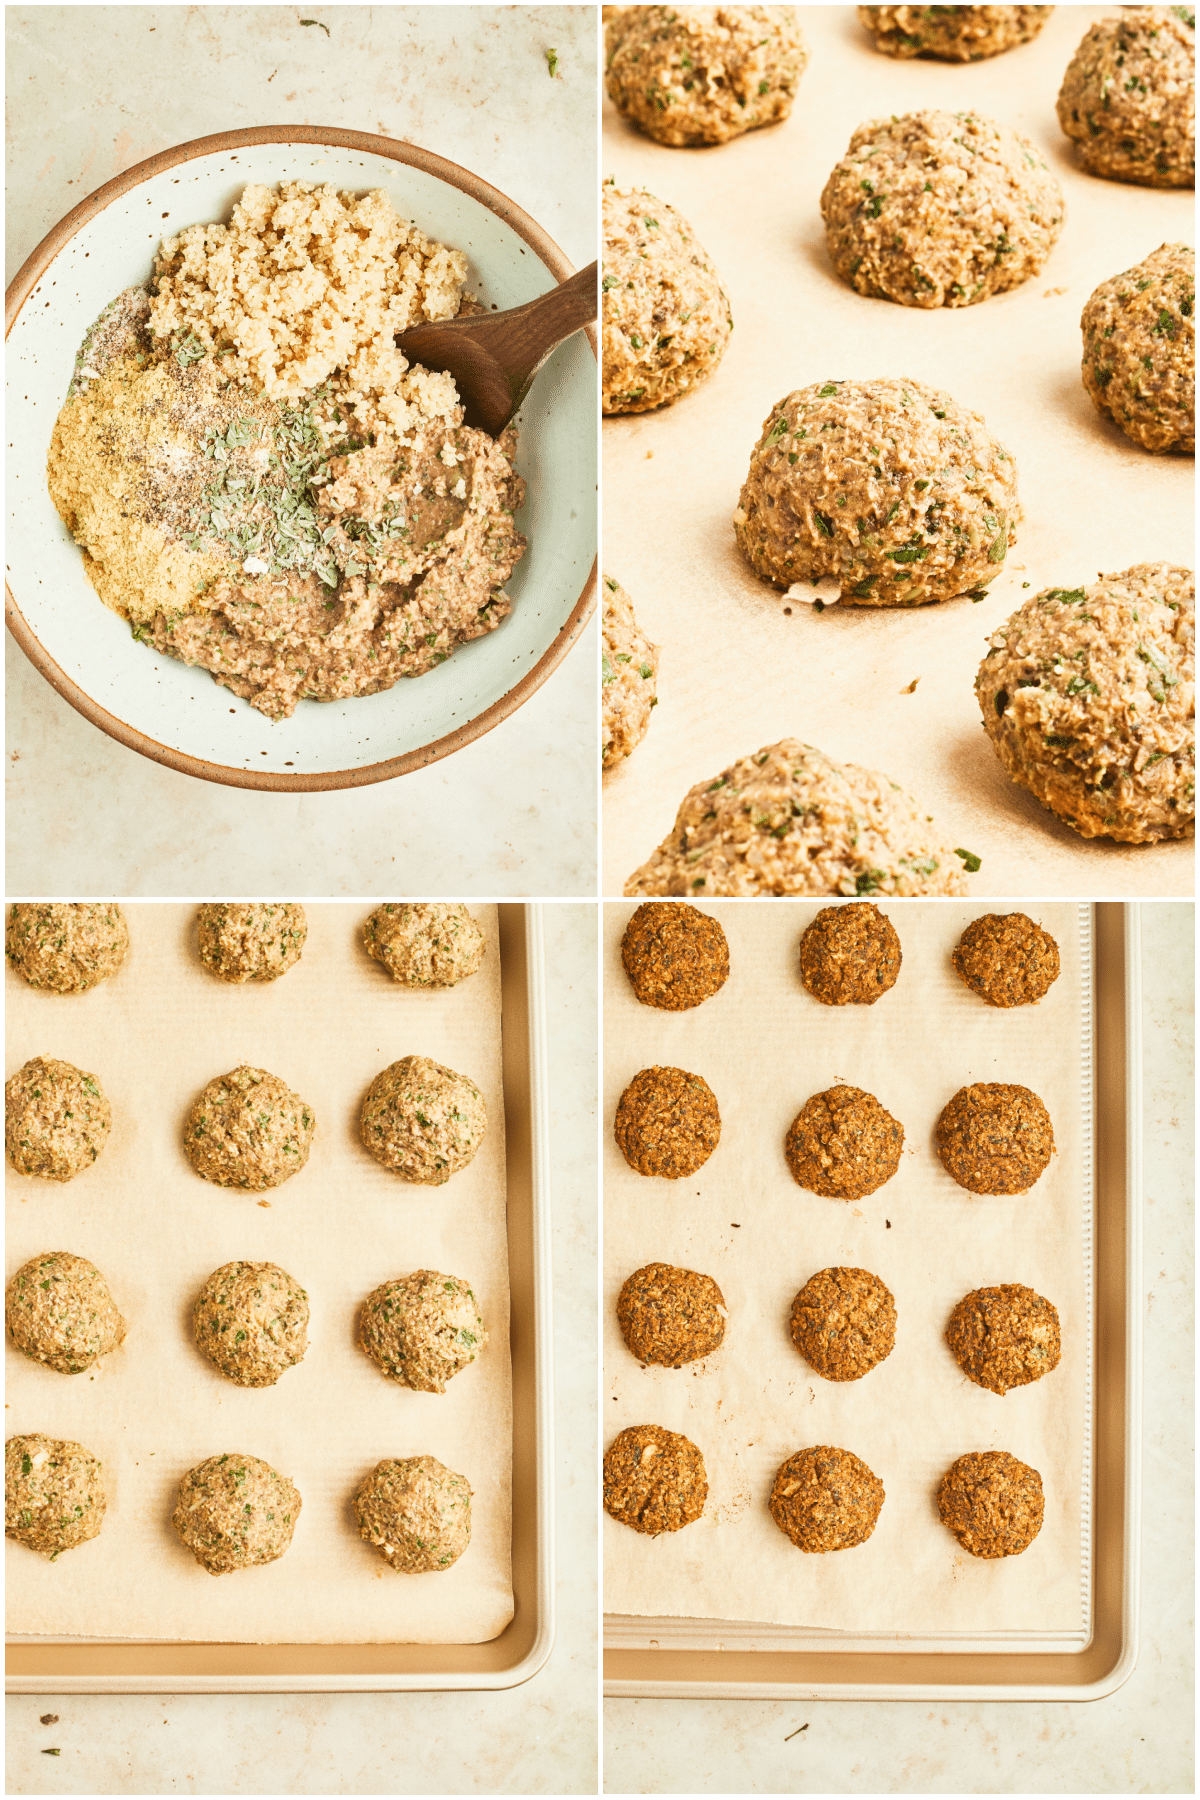 A four image collage showing the second four steps in how to make basil quinoa meatballs: combine previously blended ingredients with cooked quinoa, shape into balls, arrange on baking sheet and bake.